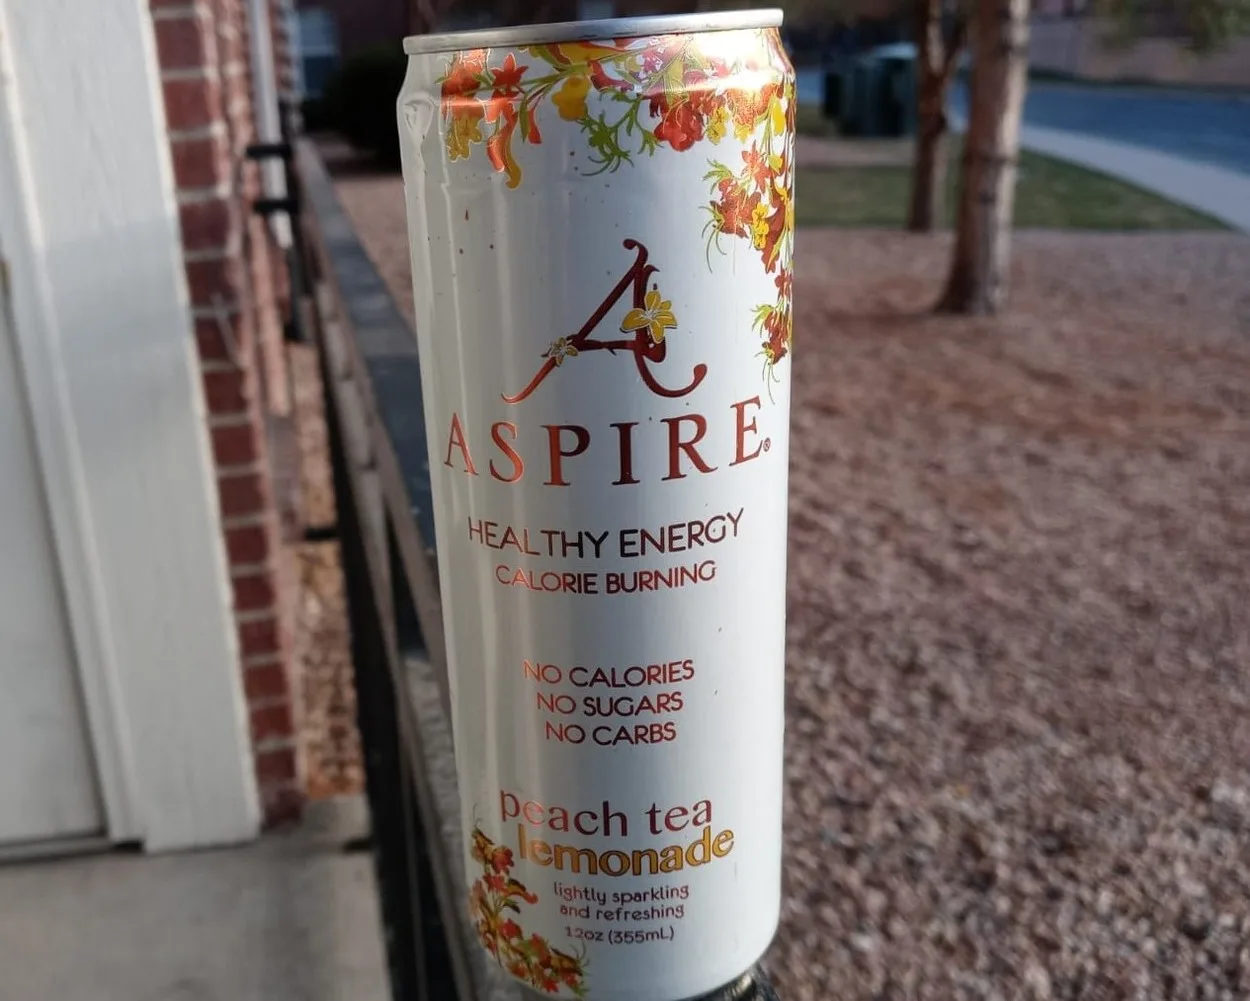 A can of Aspire Energy Drink.